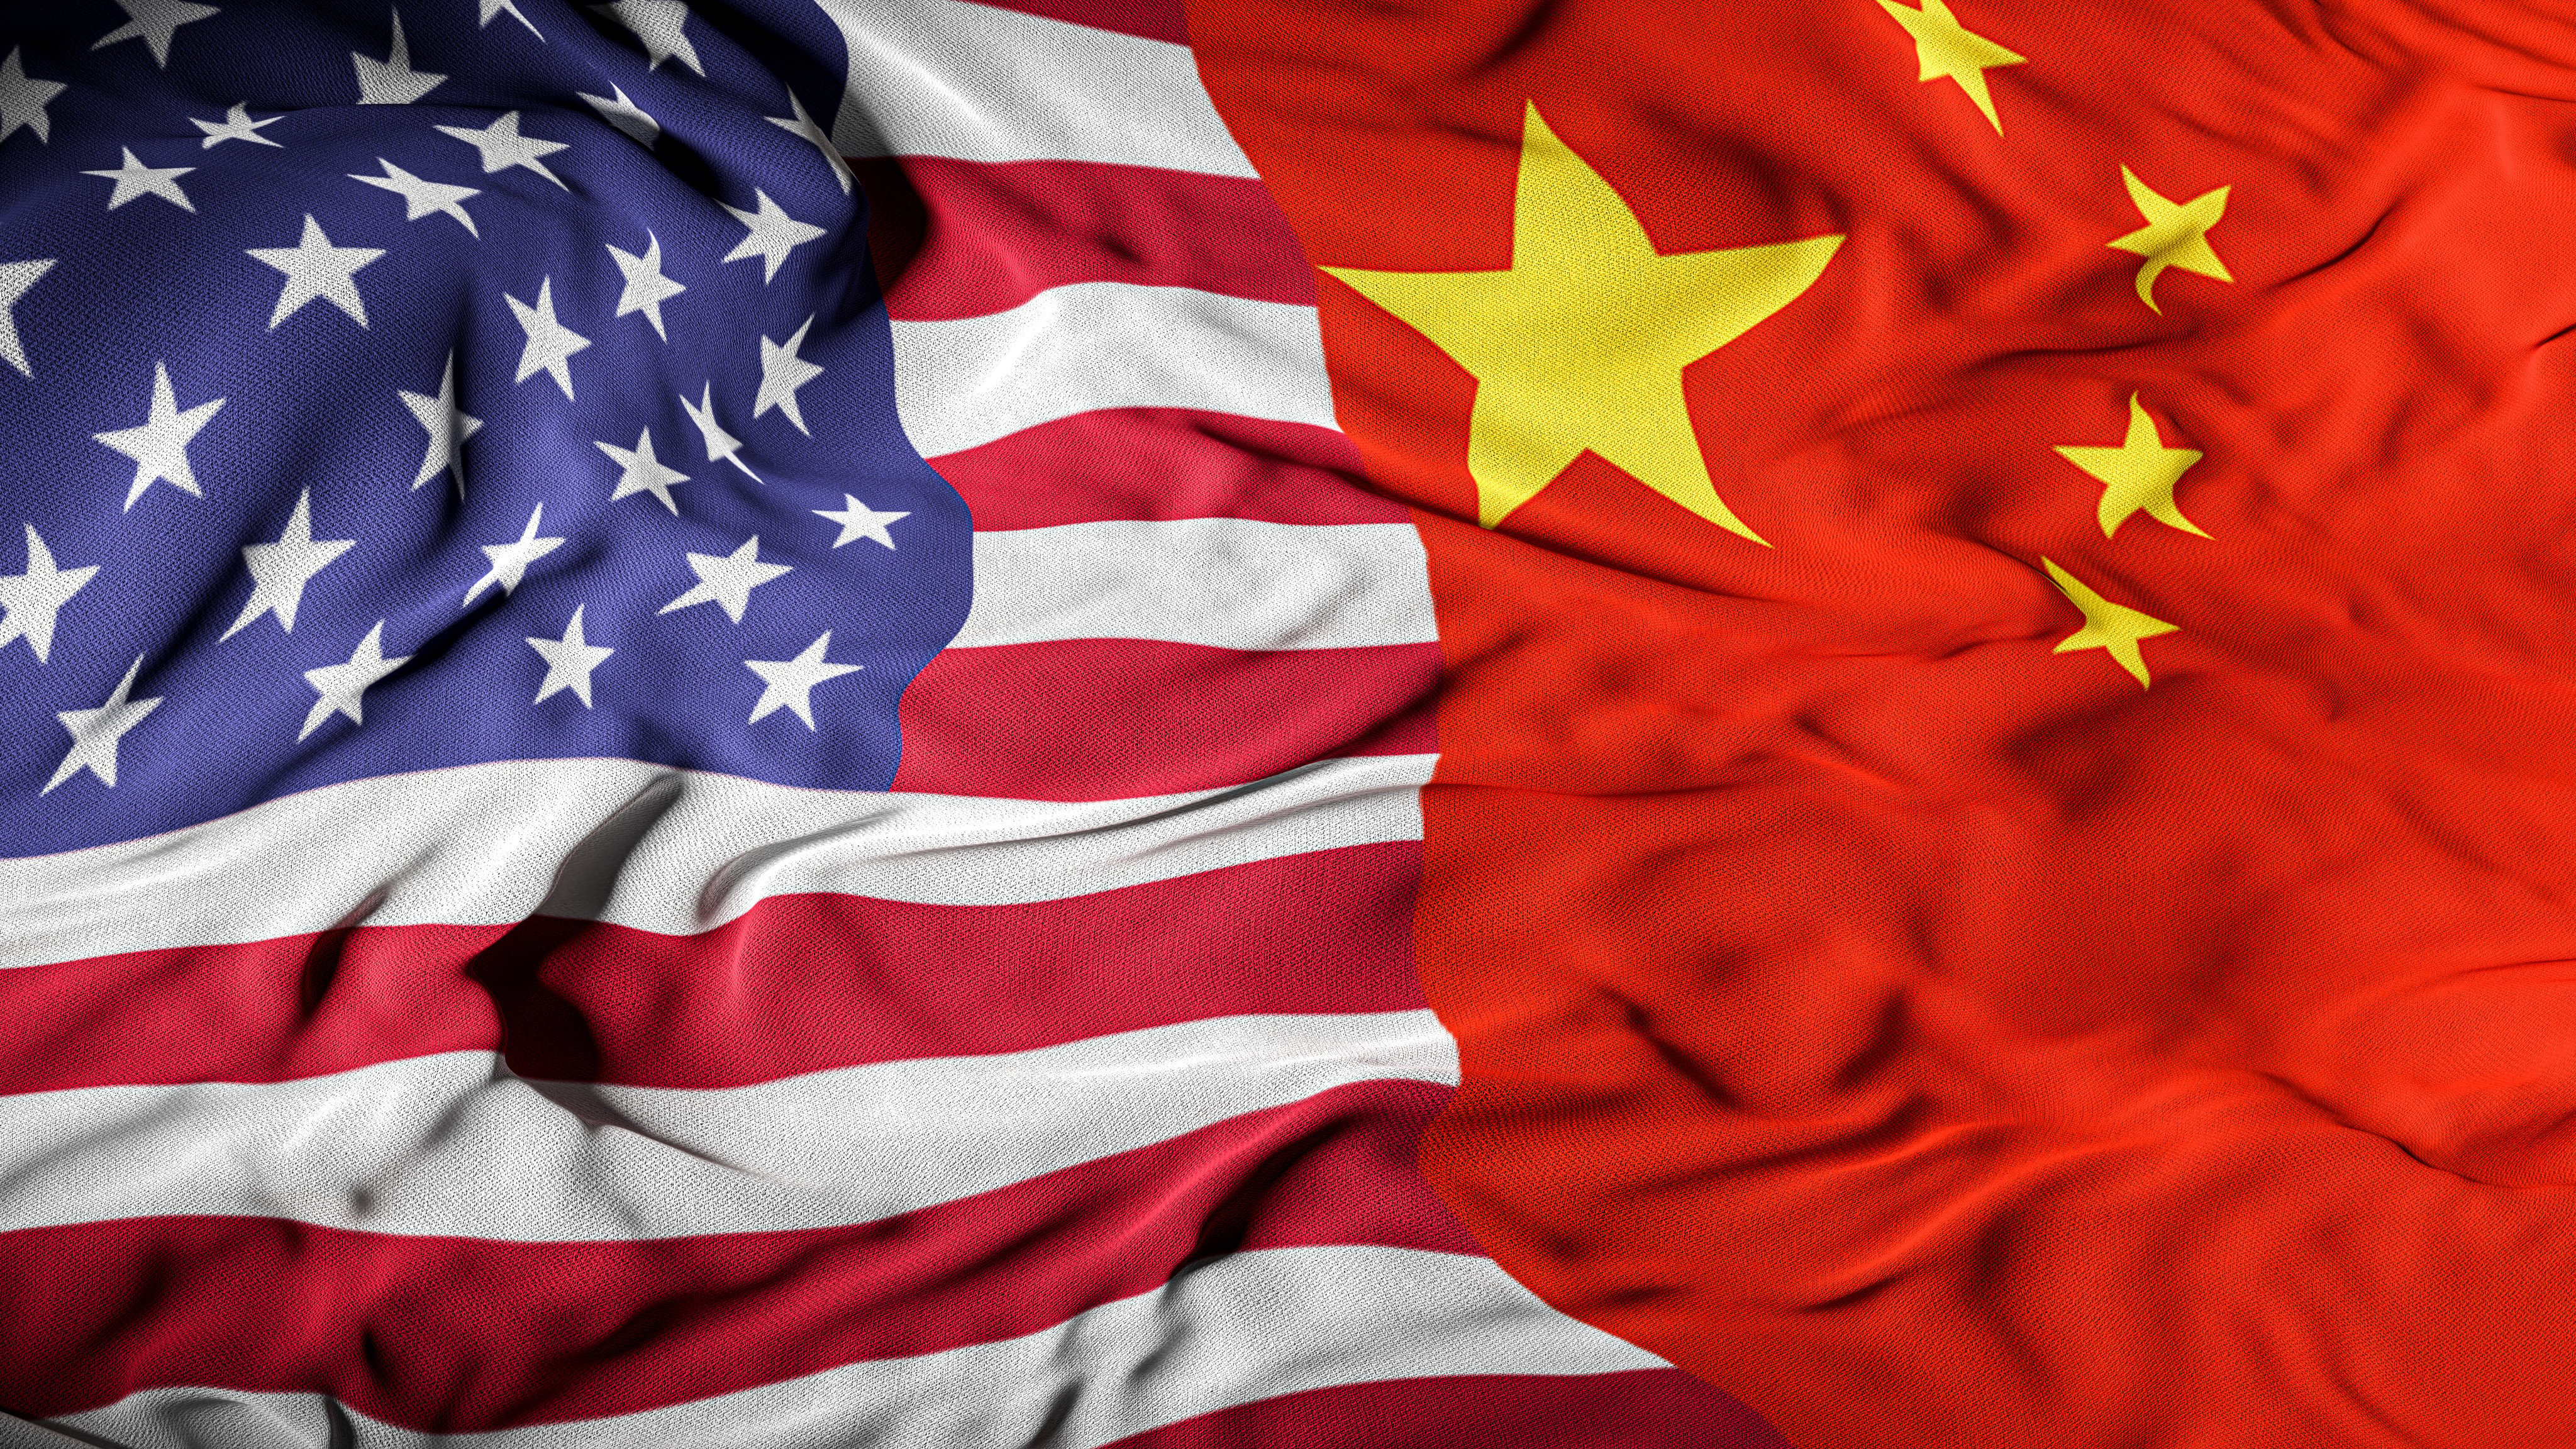 About 42 per cent of survey respondents said China was an enemy of the US, the largest share since Pew began asking the question in 2021. Illustration: Shutterstock